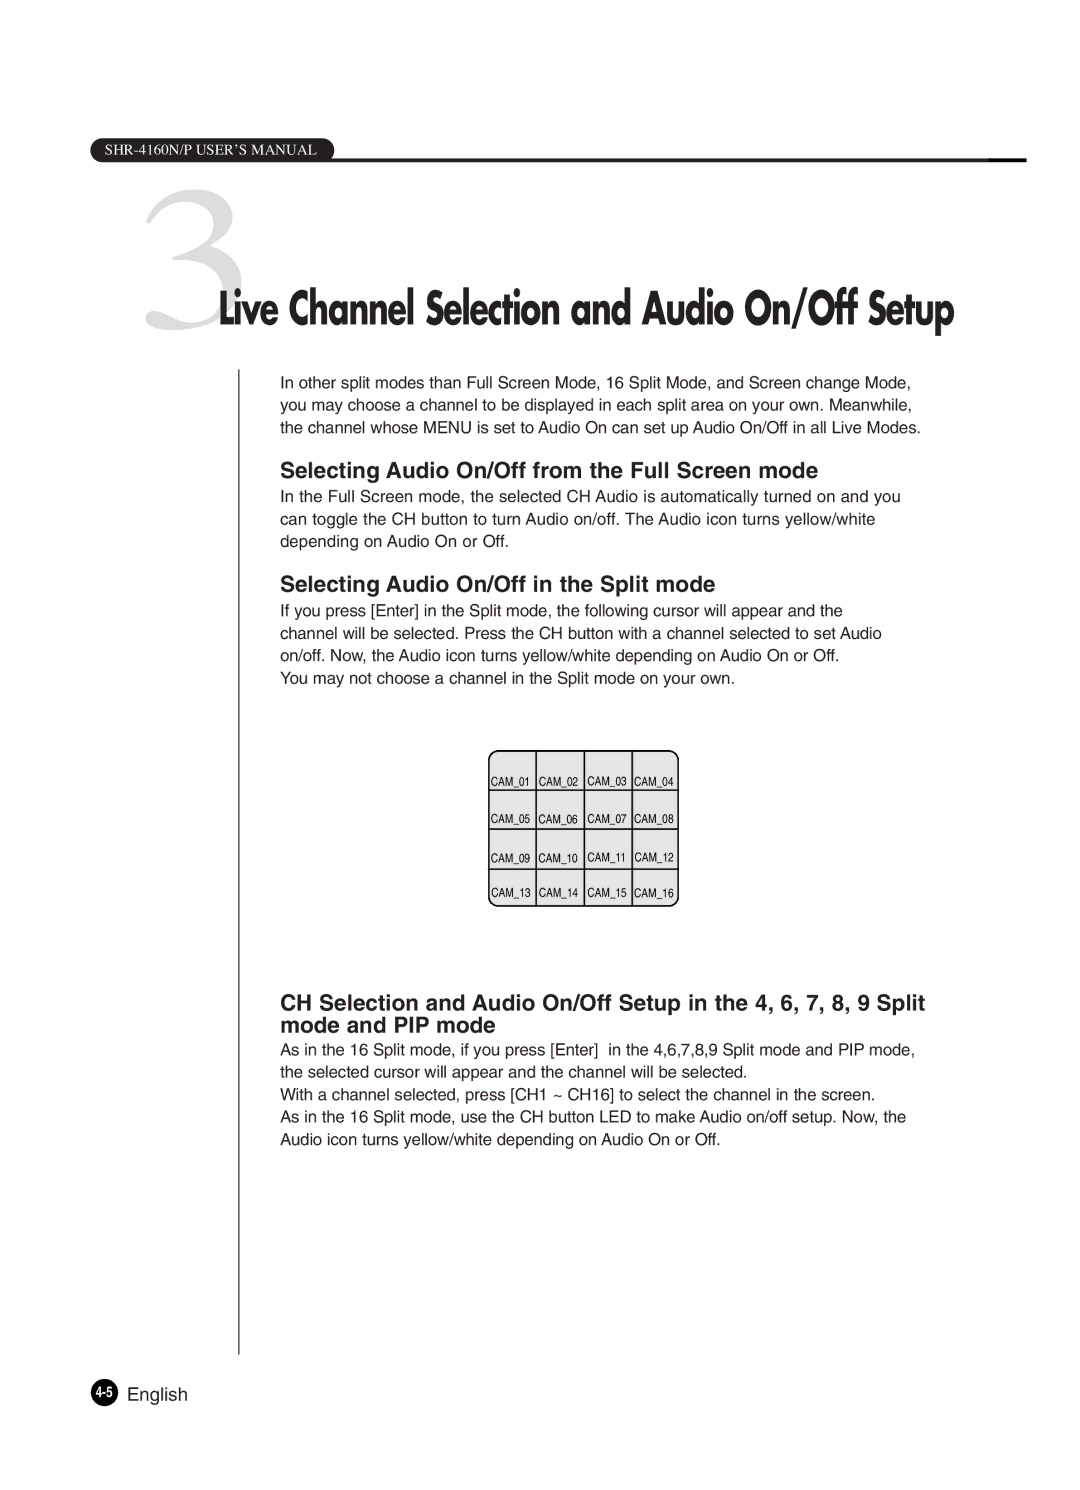 Samsung SHR-4160P manual 3Live Channel Selection and Audio On/Off Setup 